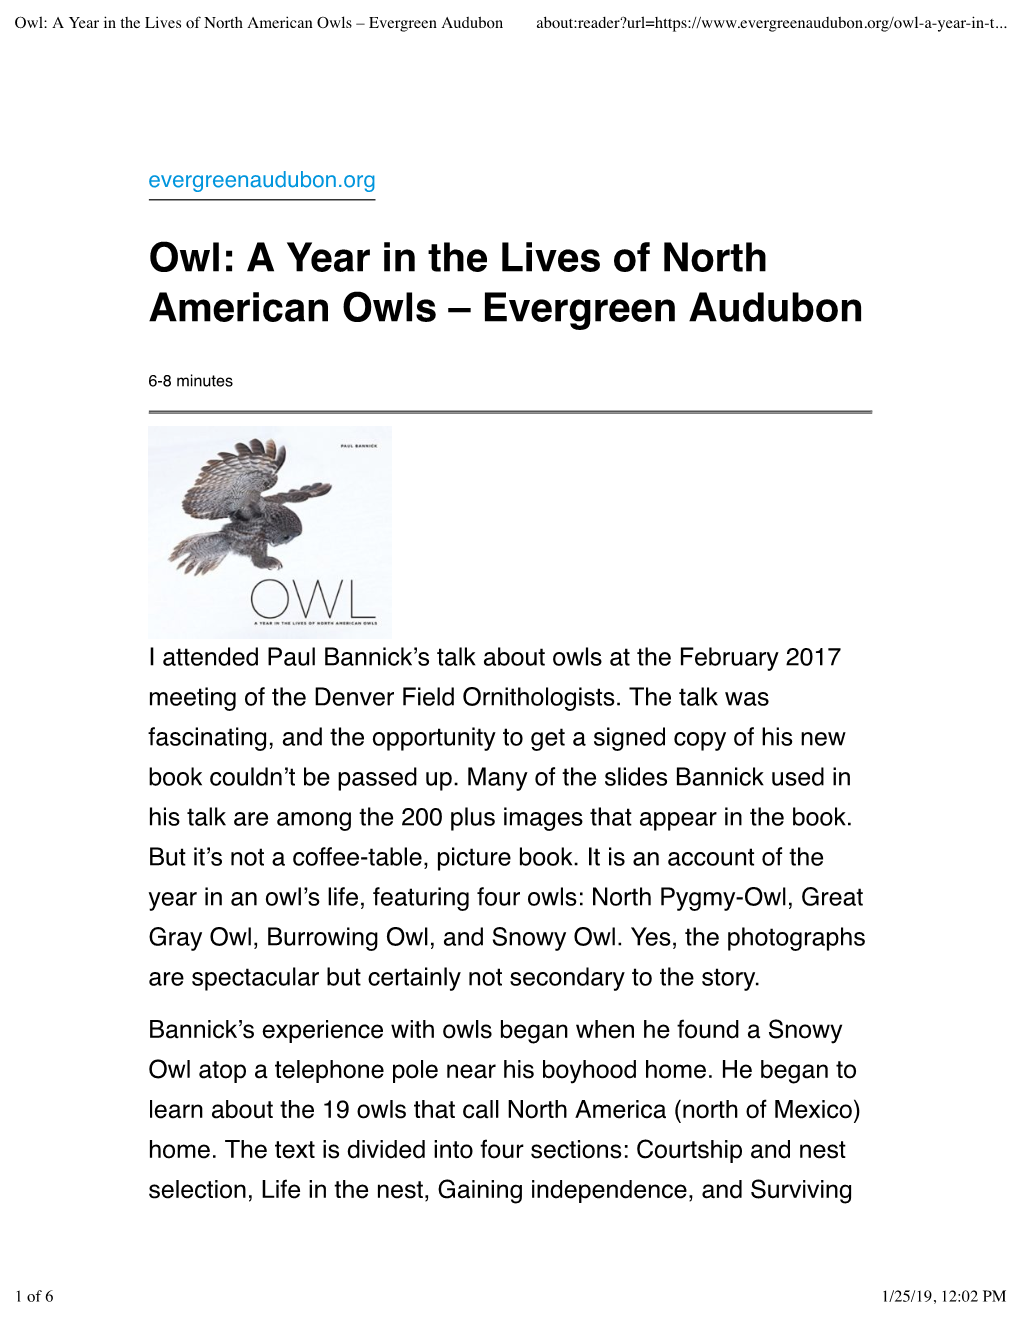 Owl: a Year in the Lives of North American Owls – Evergreen Audubon About:Reader?Url=